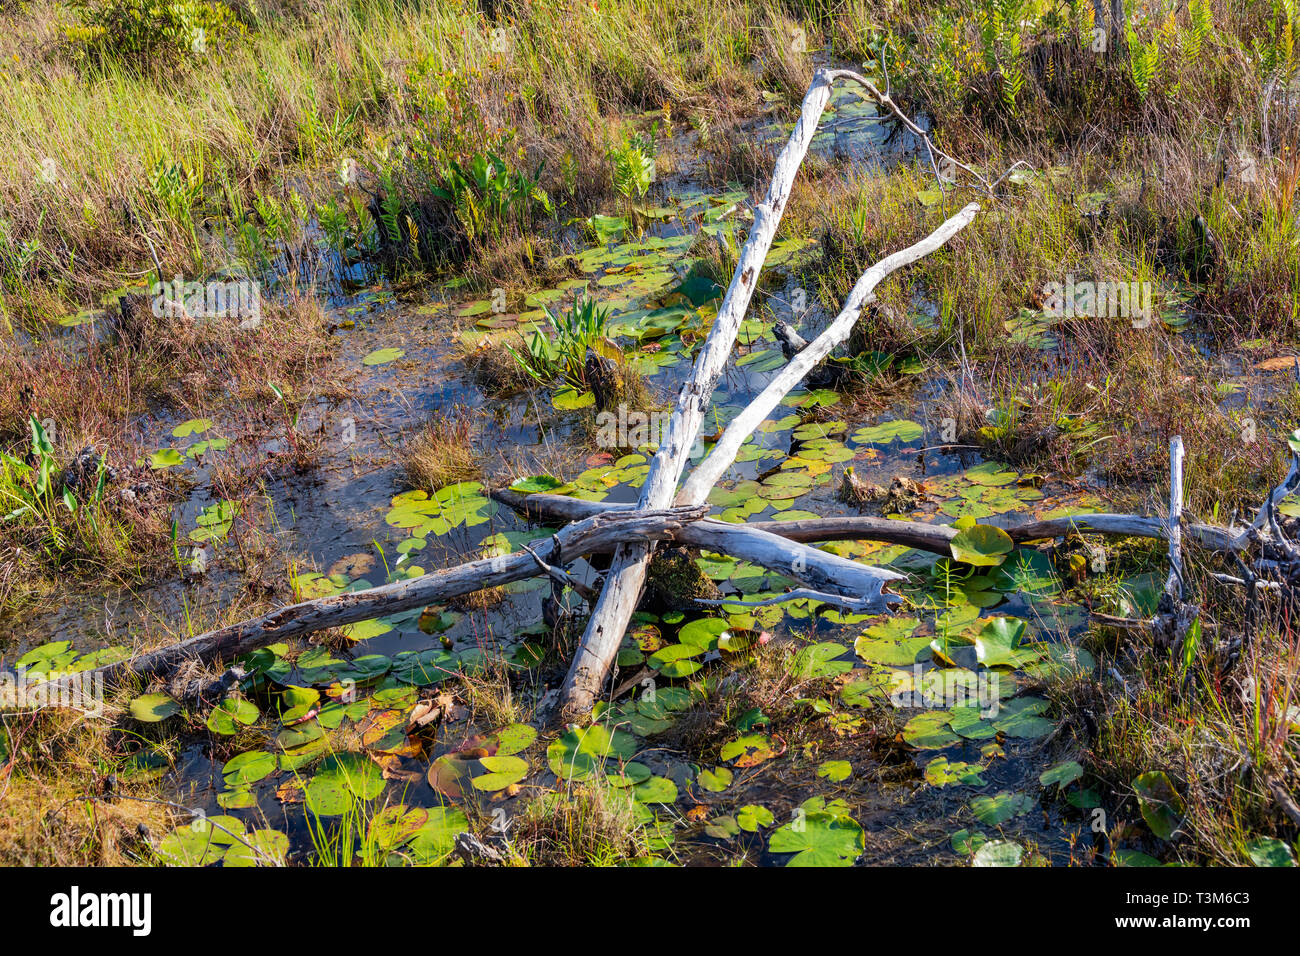 An arrangement of small dead trees and limbs among lily pads in a shallow swamp area of the Okefenokee swamp. Stock Photo